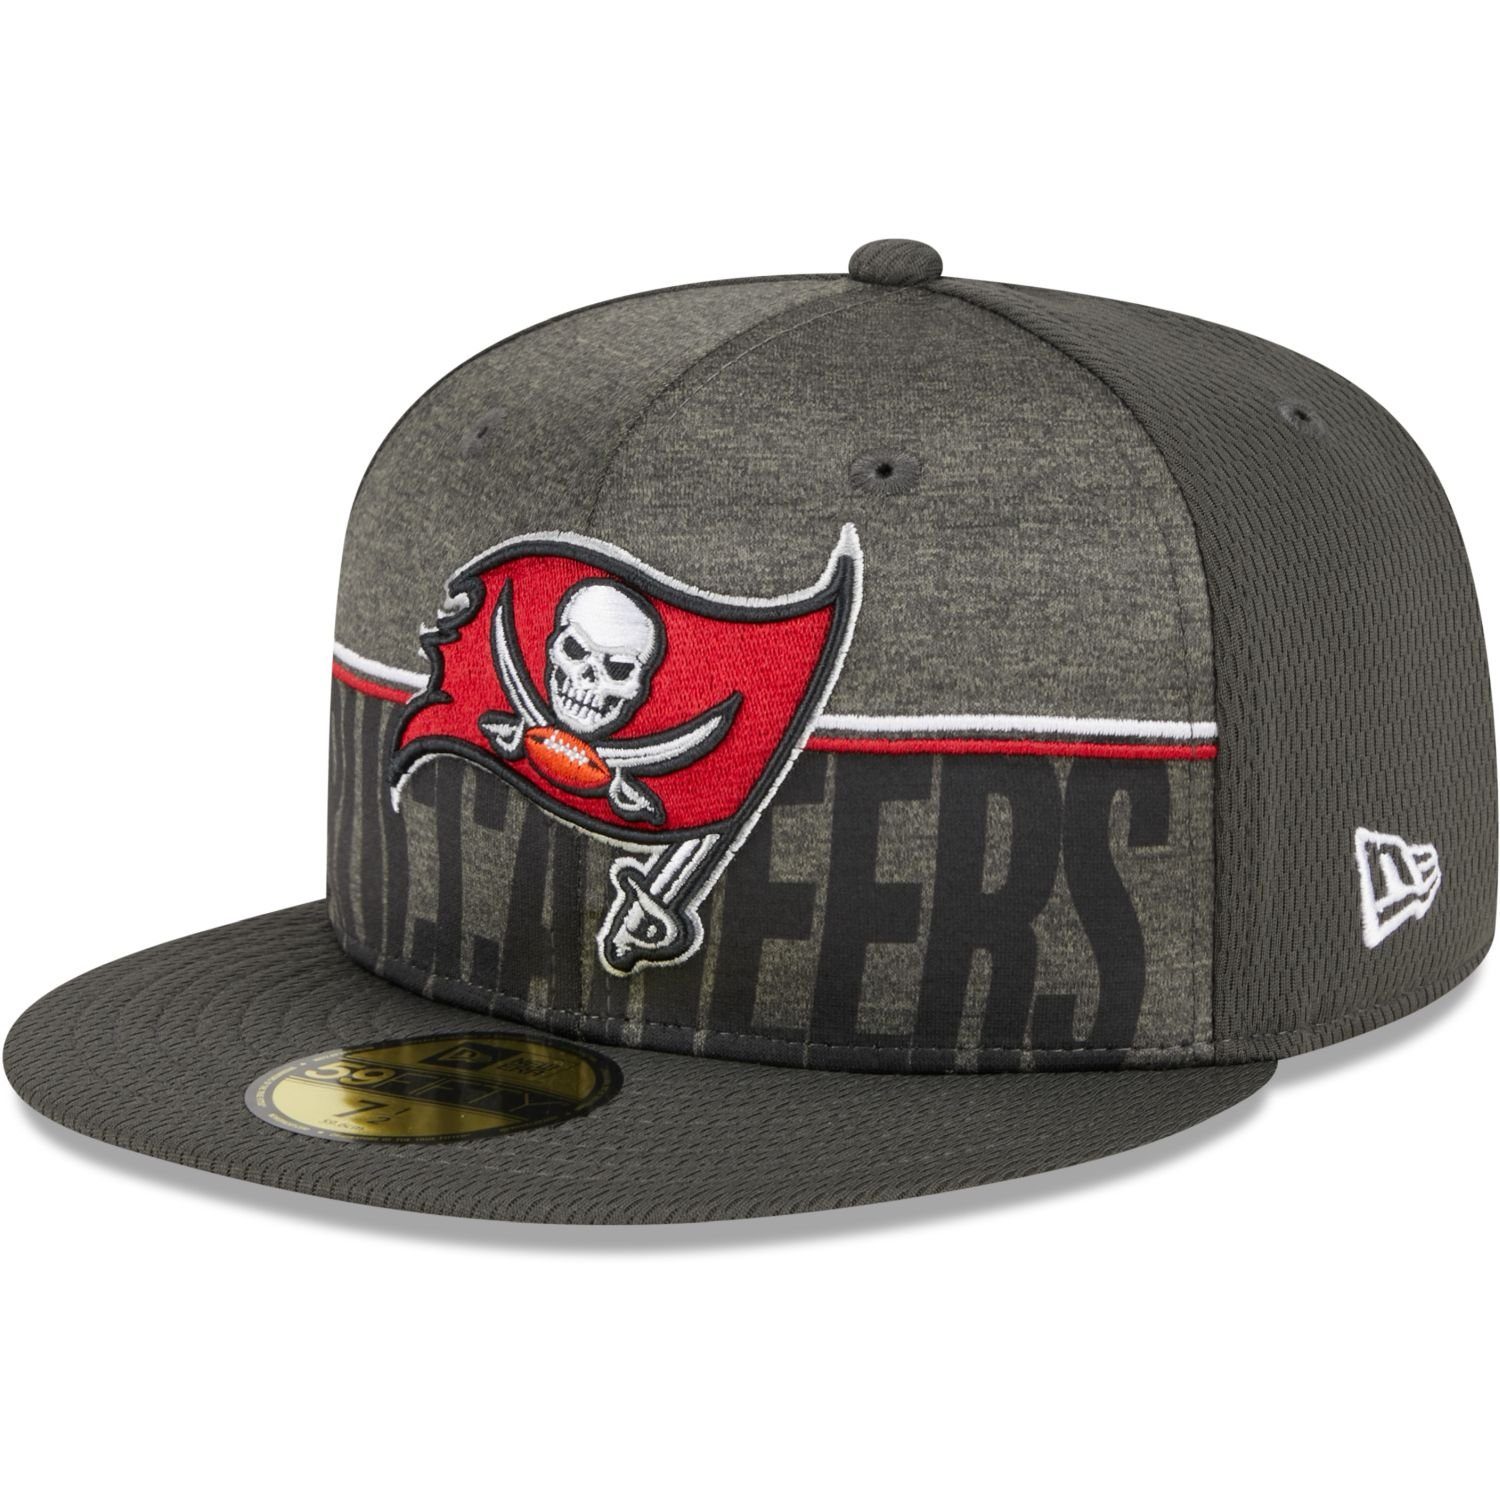 New Era Fitted Cap 59Fifty NFL TRAINING Tampa Bay Buccaneers